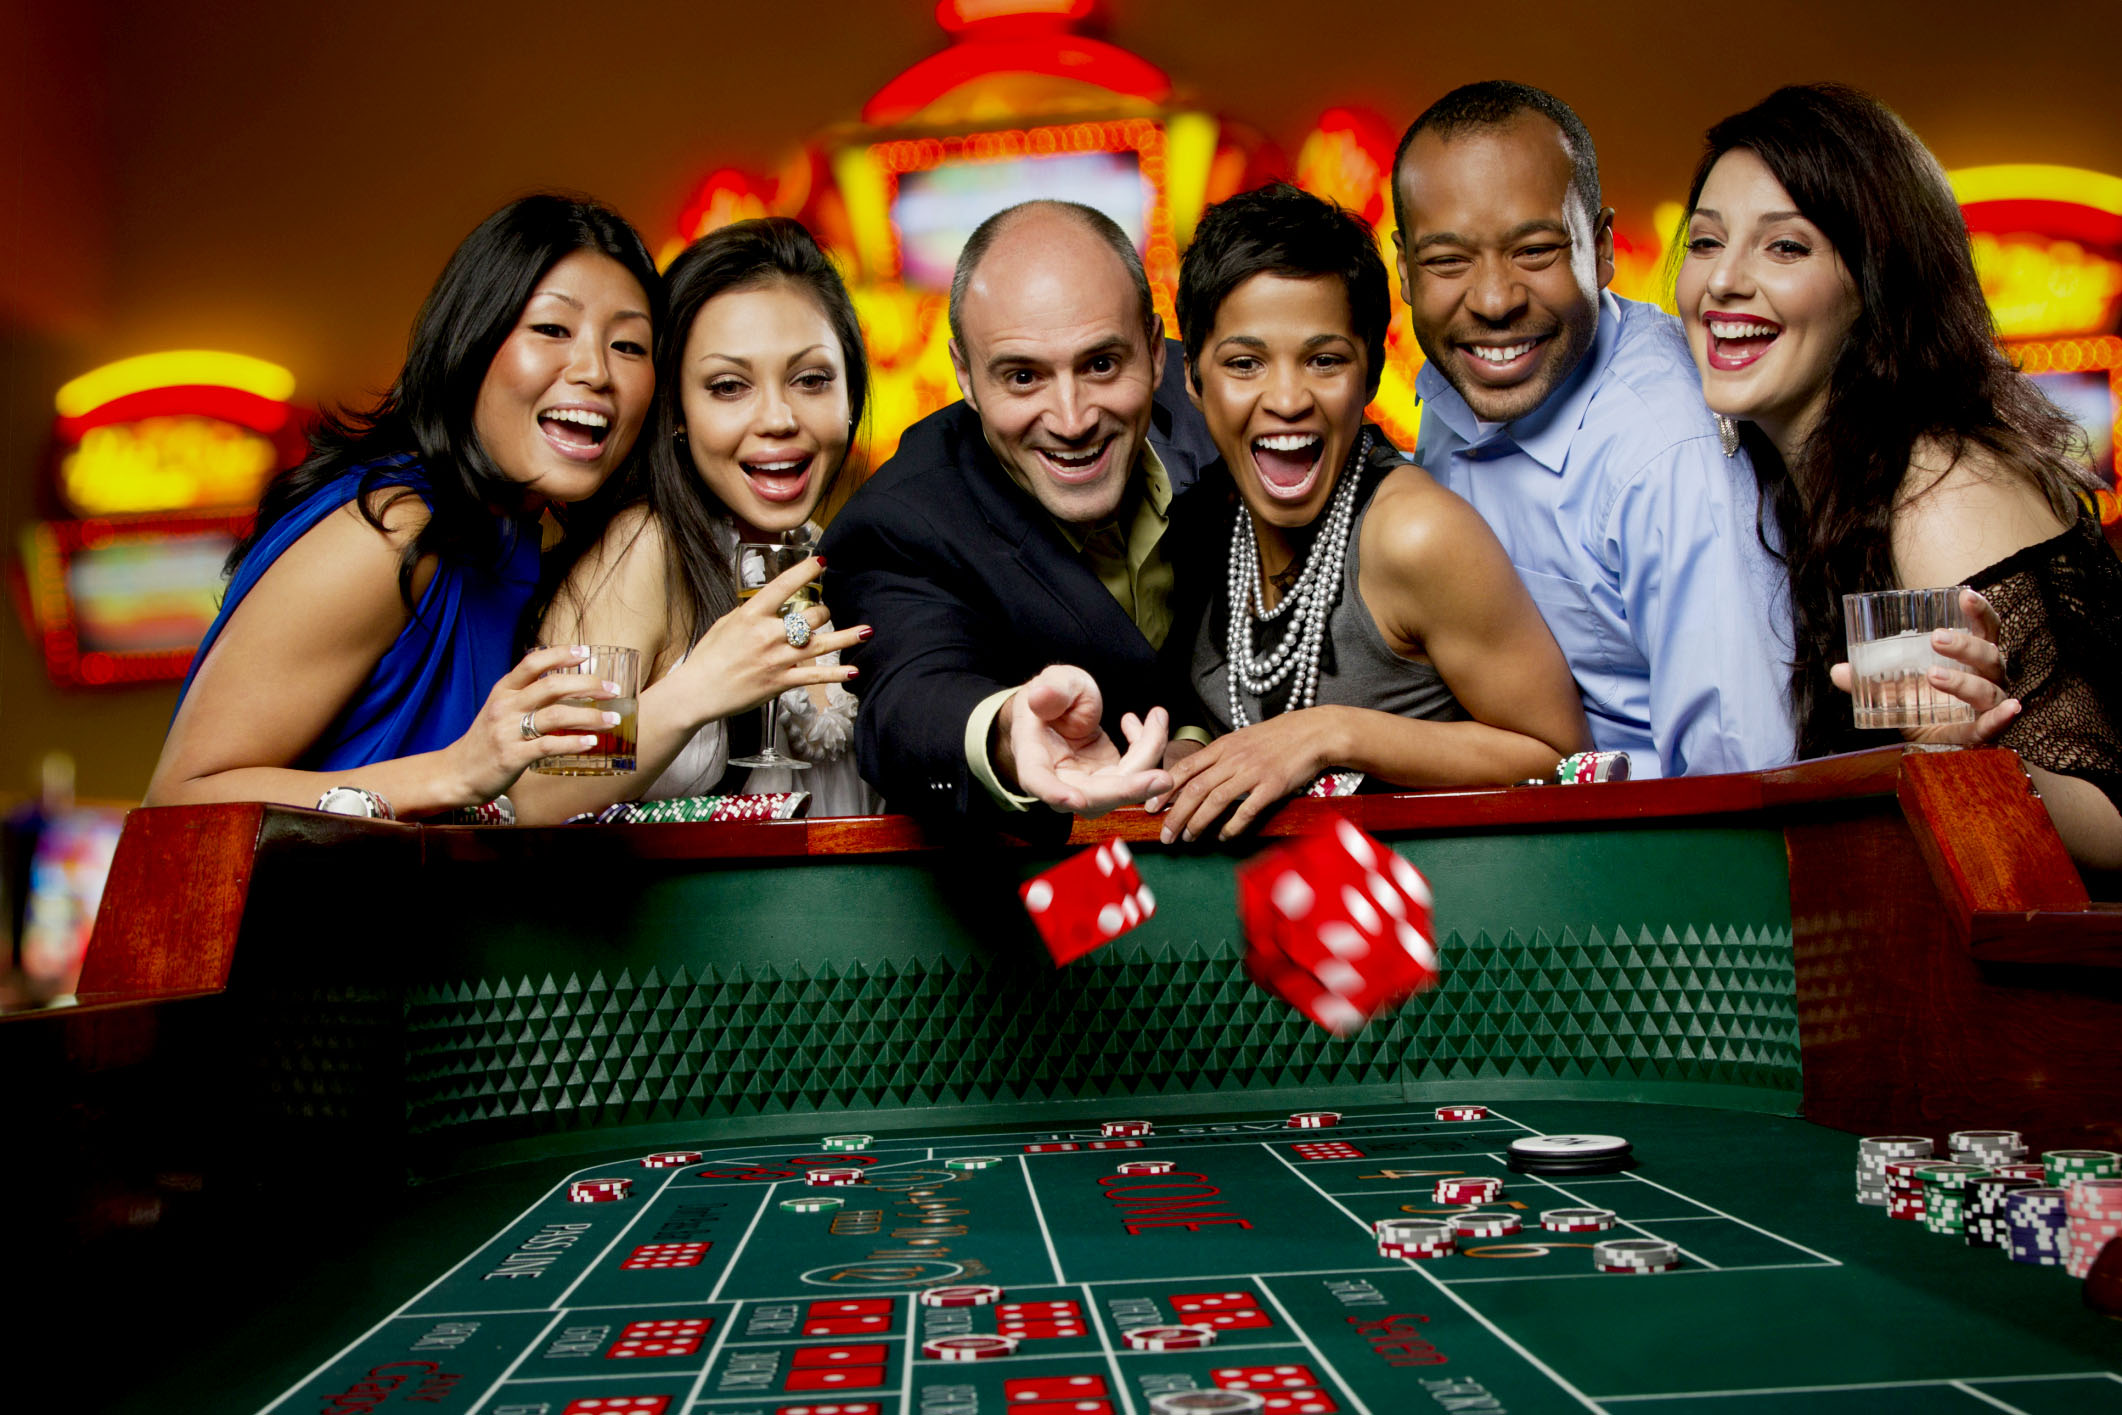 Numerous players declare that because craps is a dice game